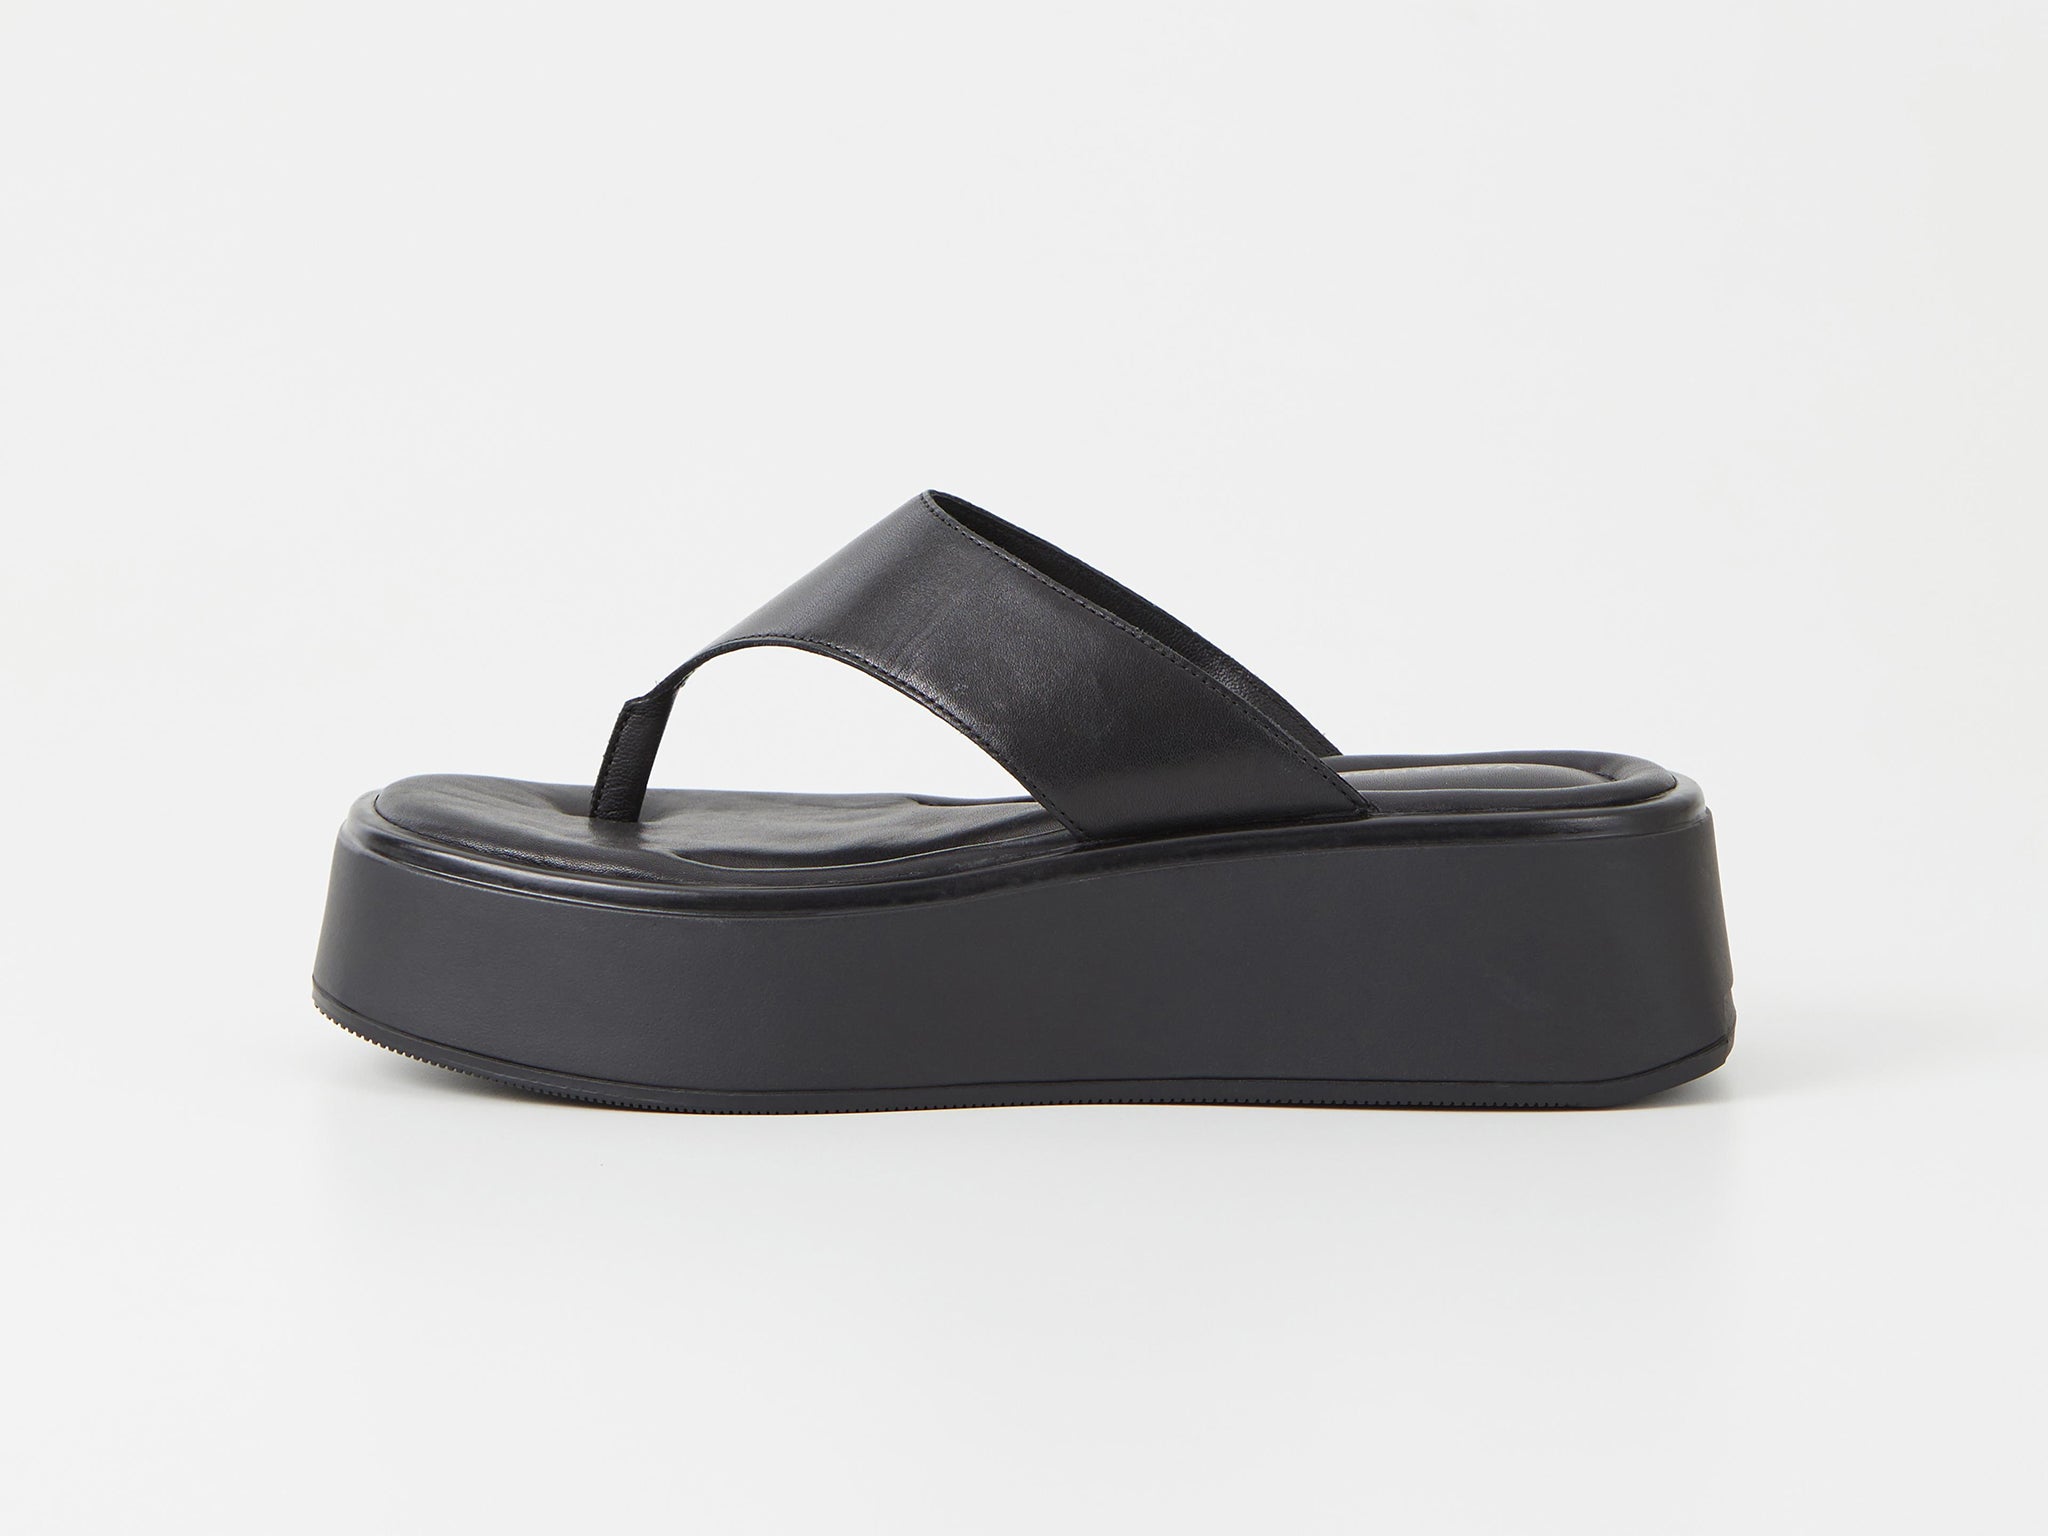 Best women’s thong sandals 2021: The It-girl summer shoe | The Independent